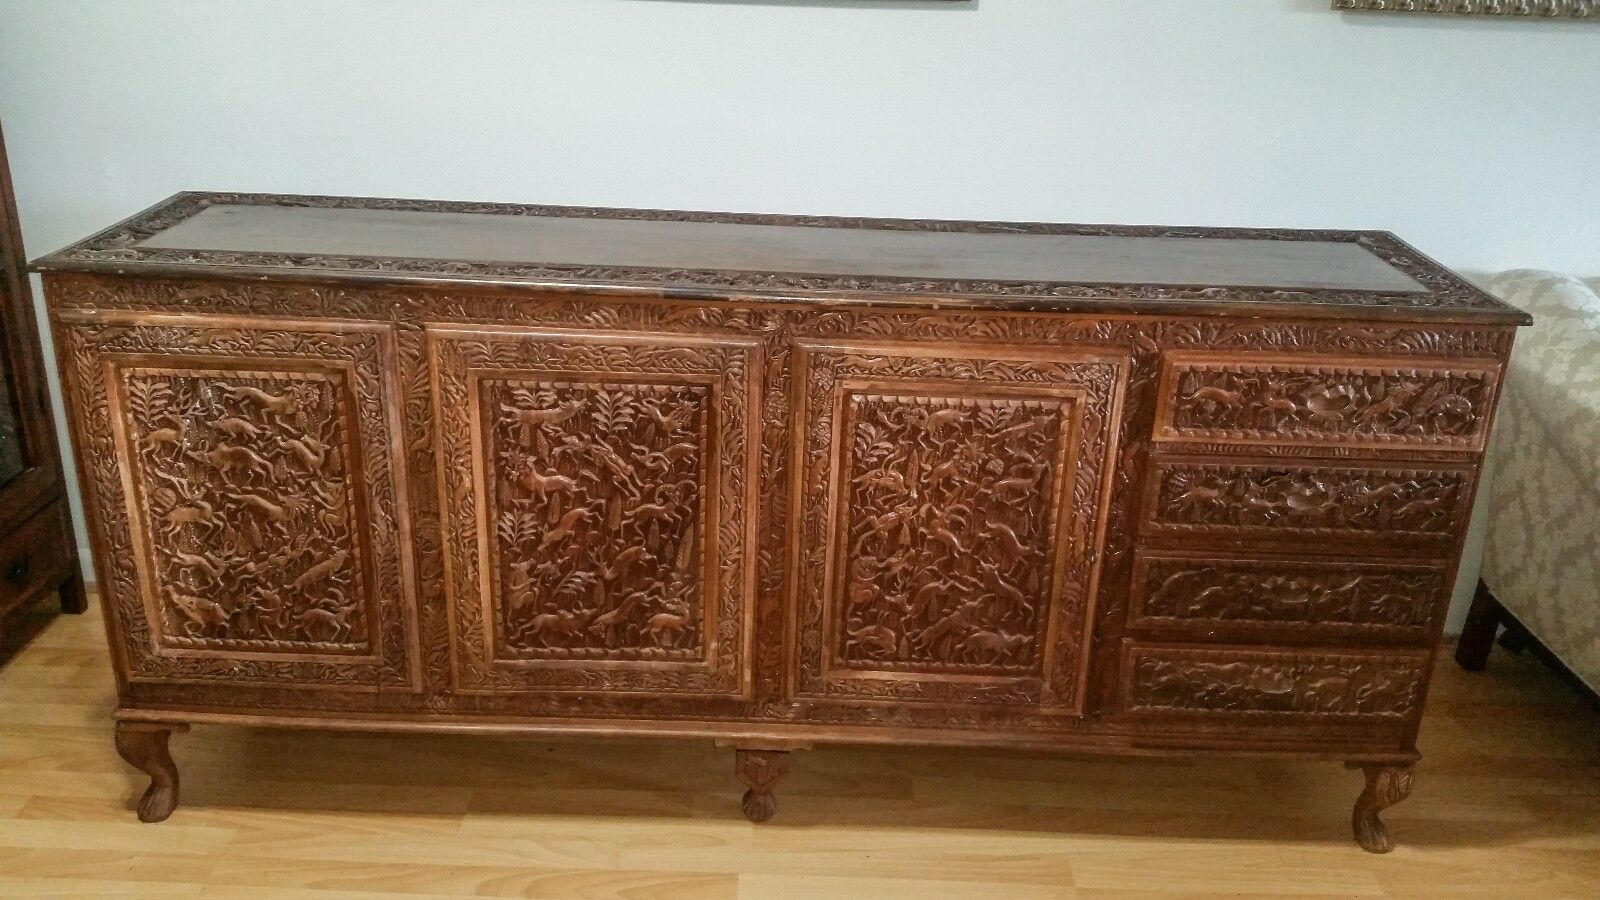 Unique One Of A Kind Handcrafted Sideboard With A Bible Theme